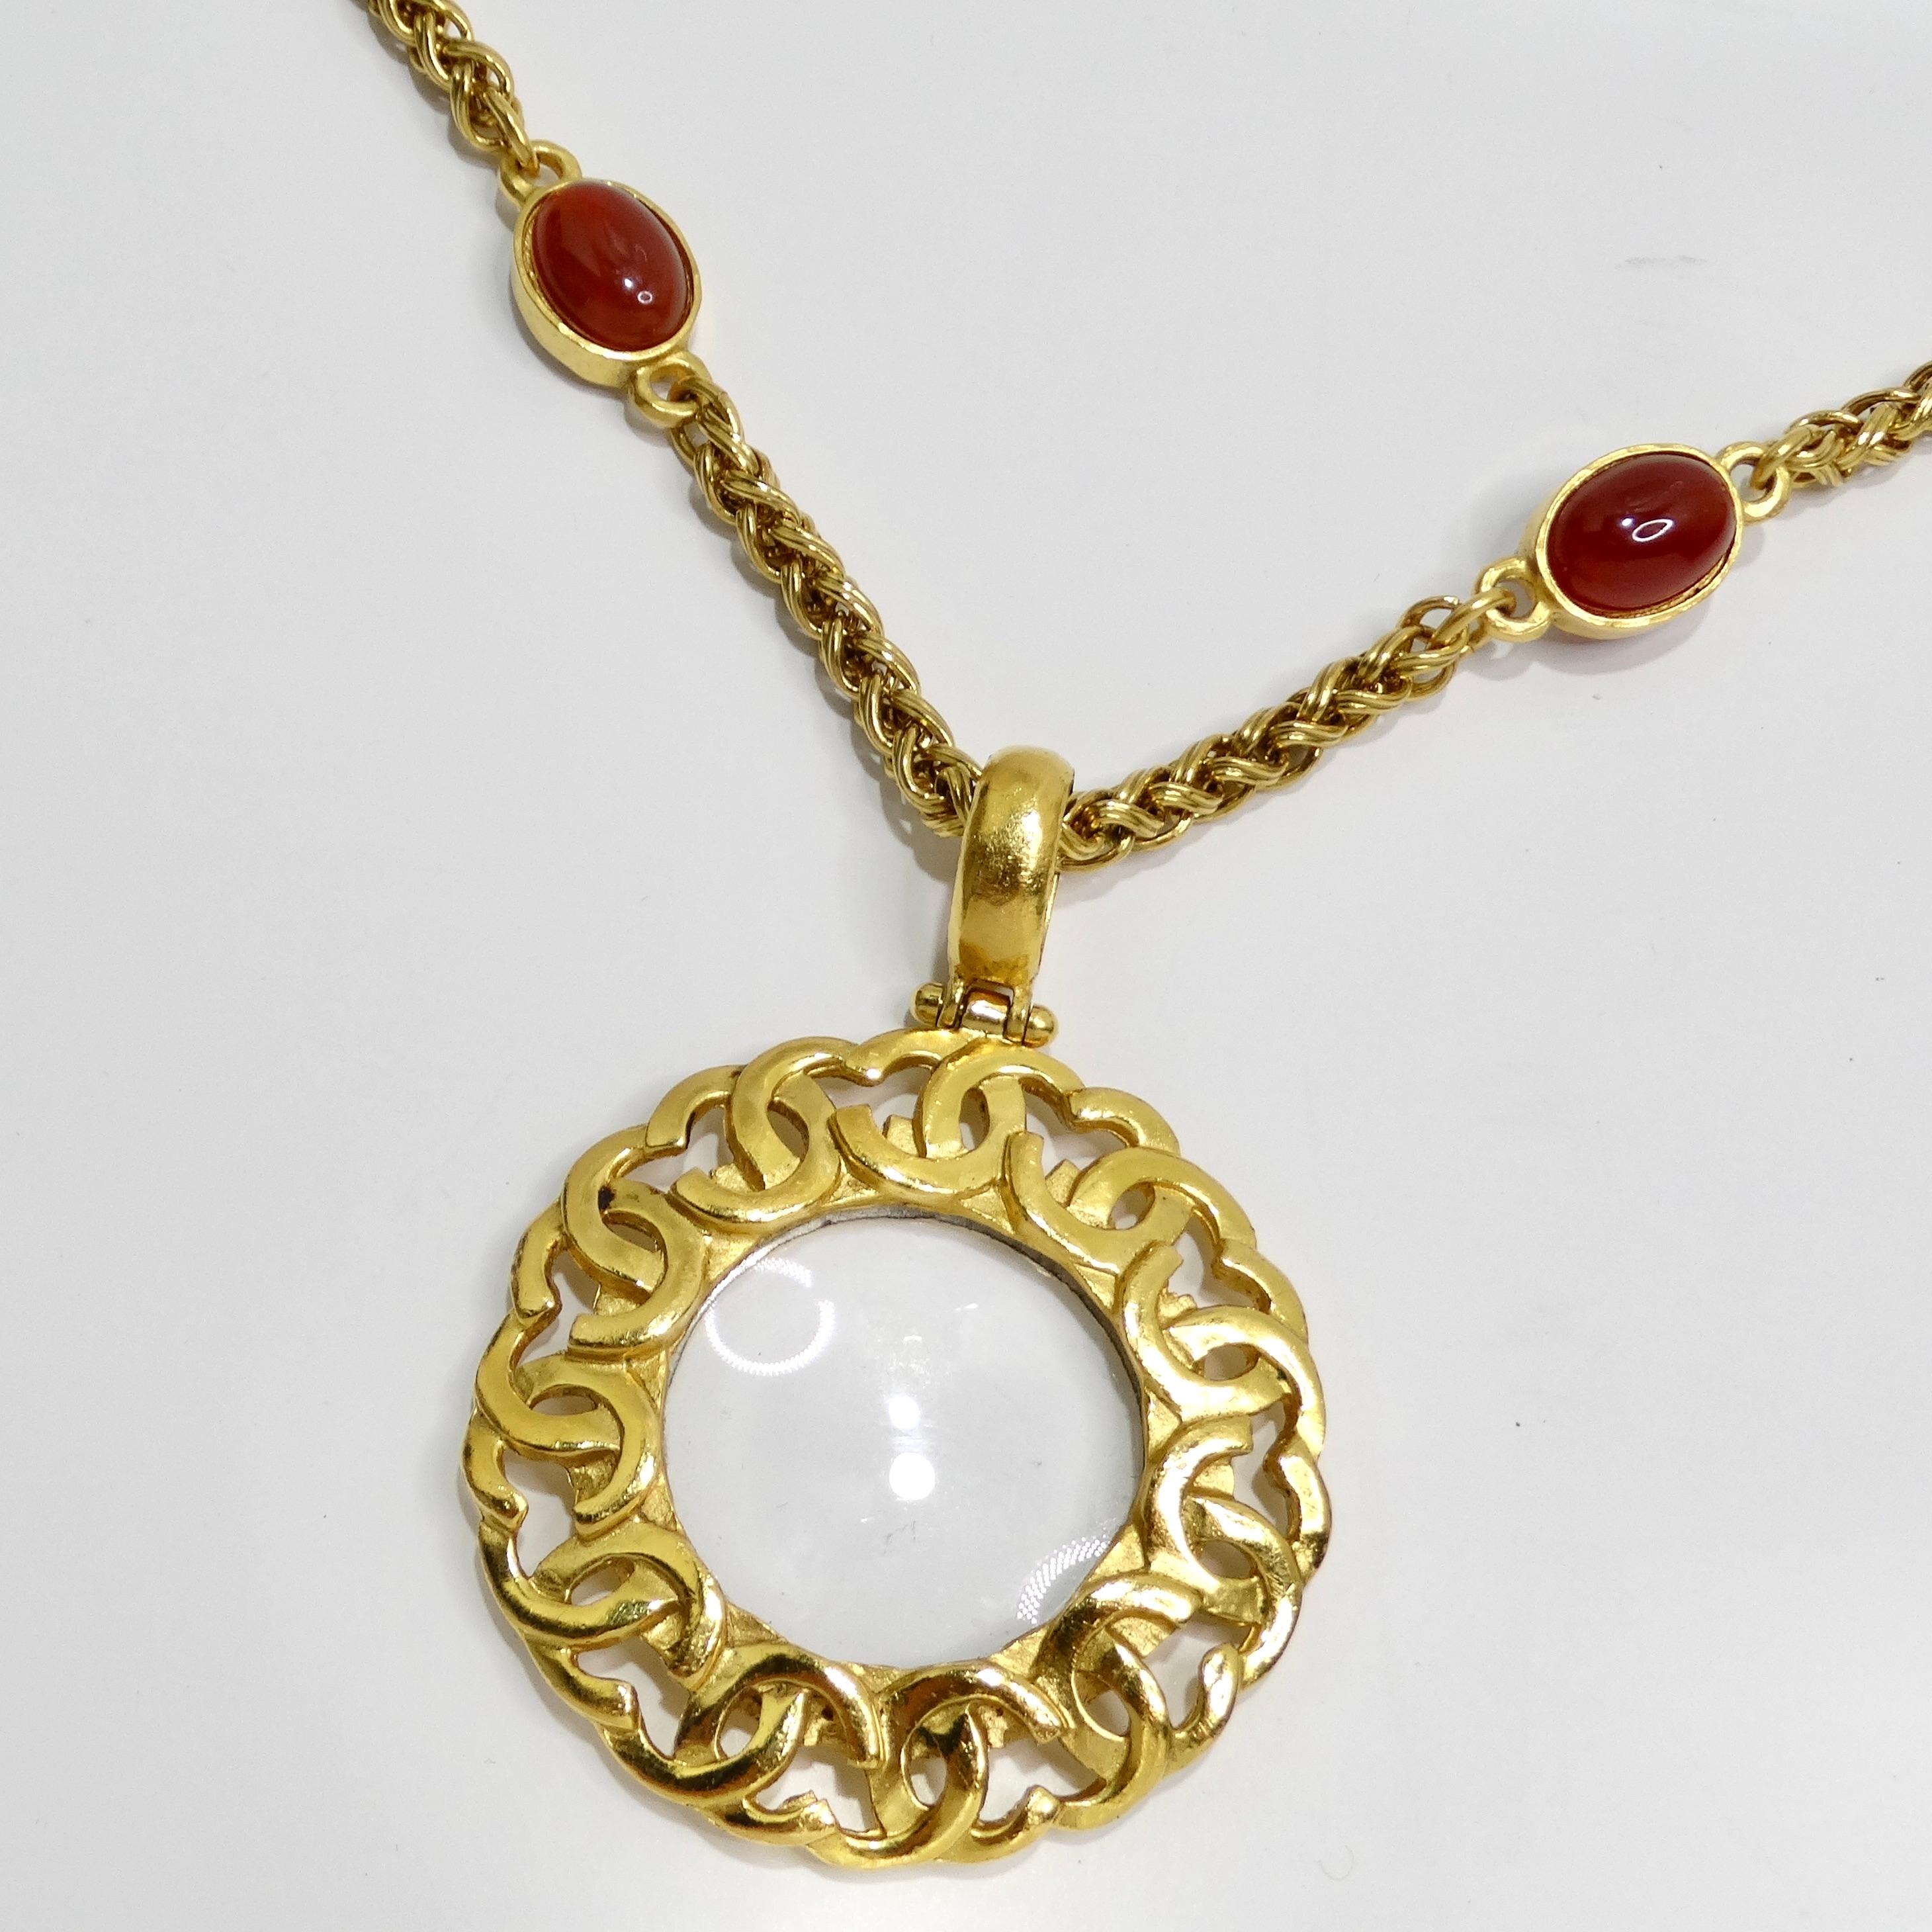 Chanel 1995 Gold Tone Gripoix Glass Pendant Necklace In Good Condition For Sale In Scottsdale, AZ